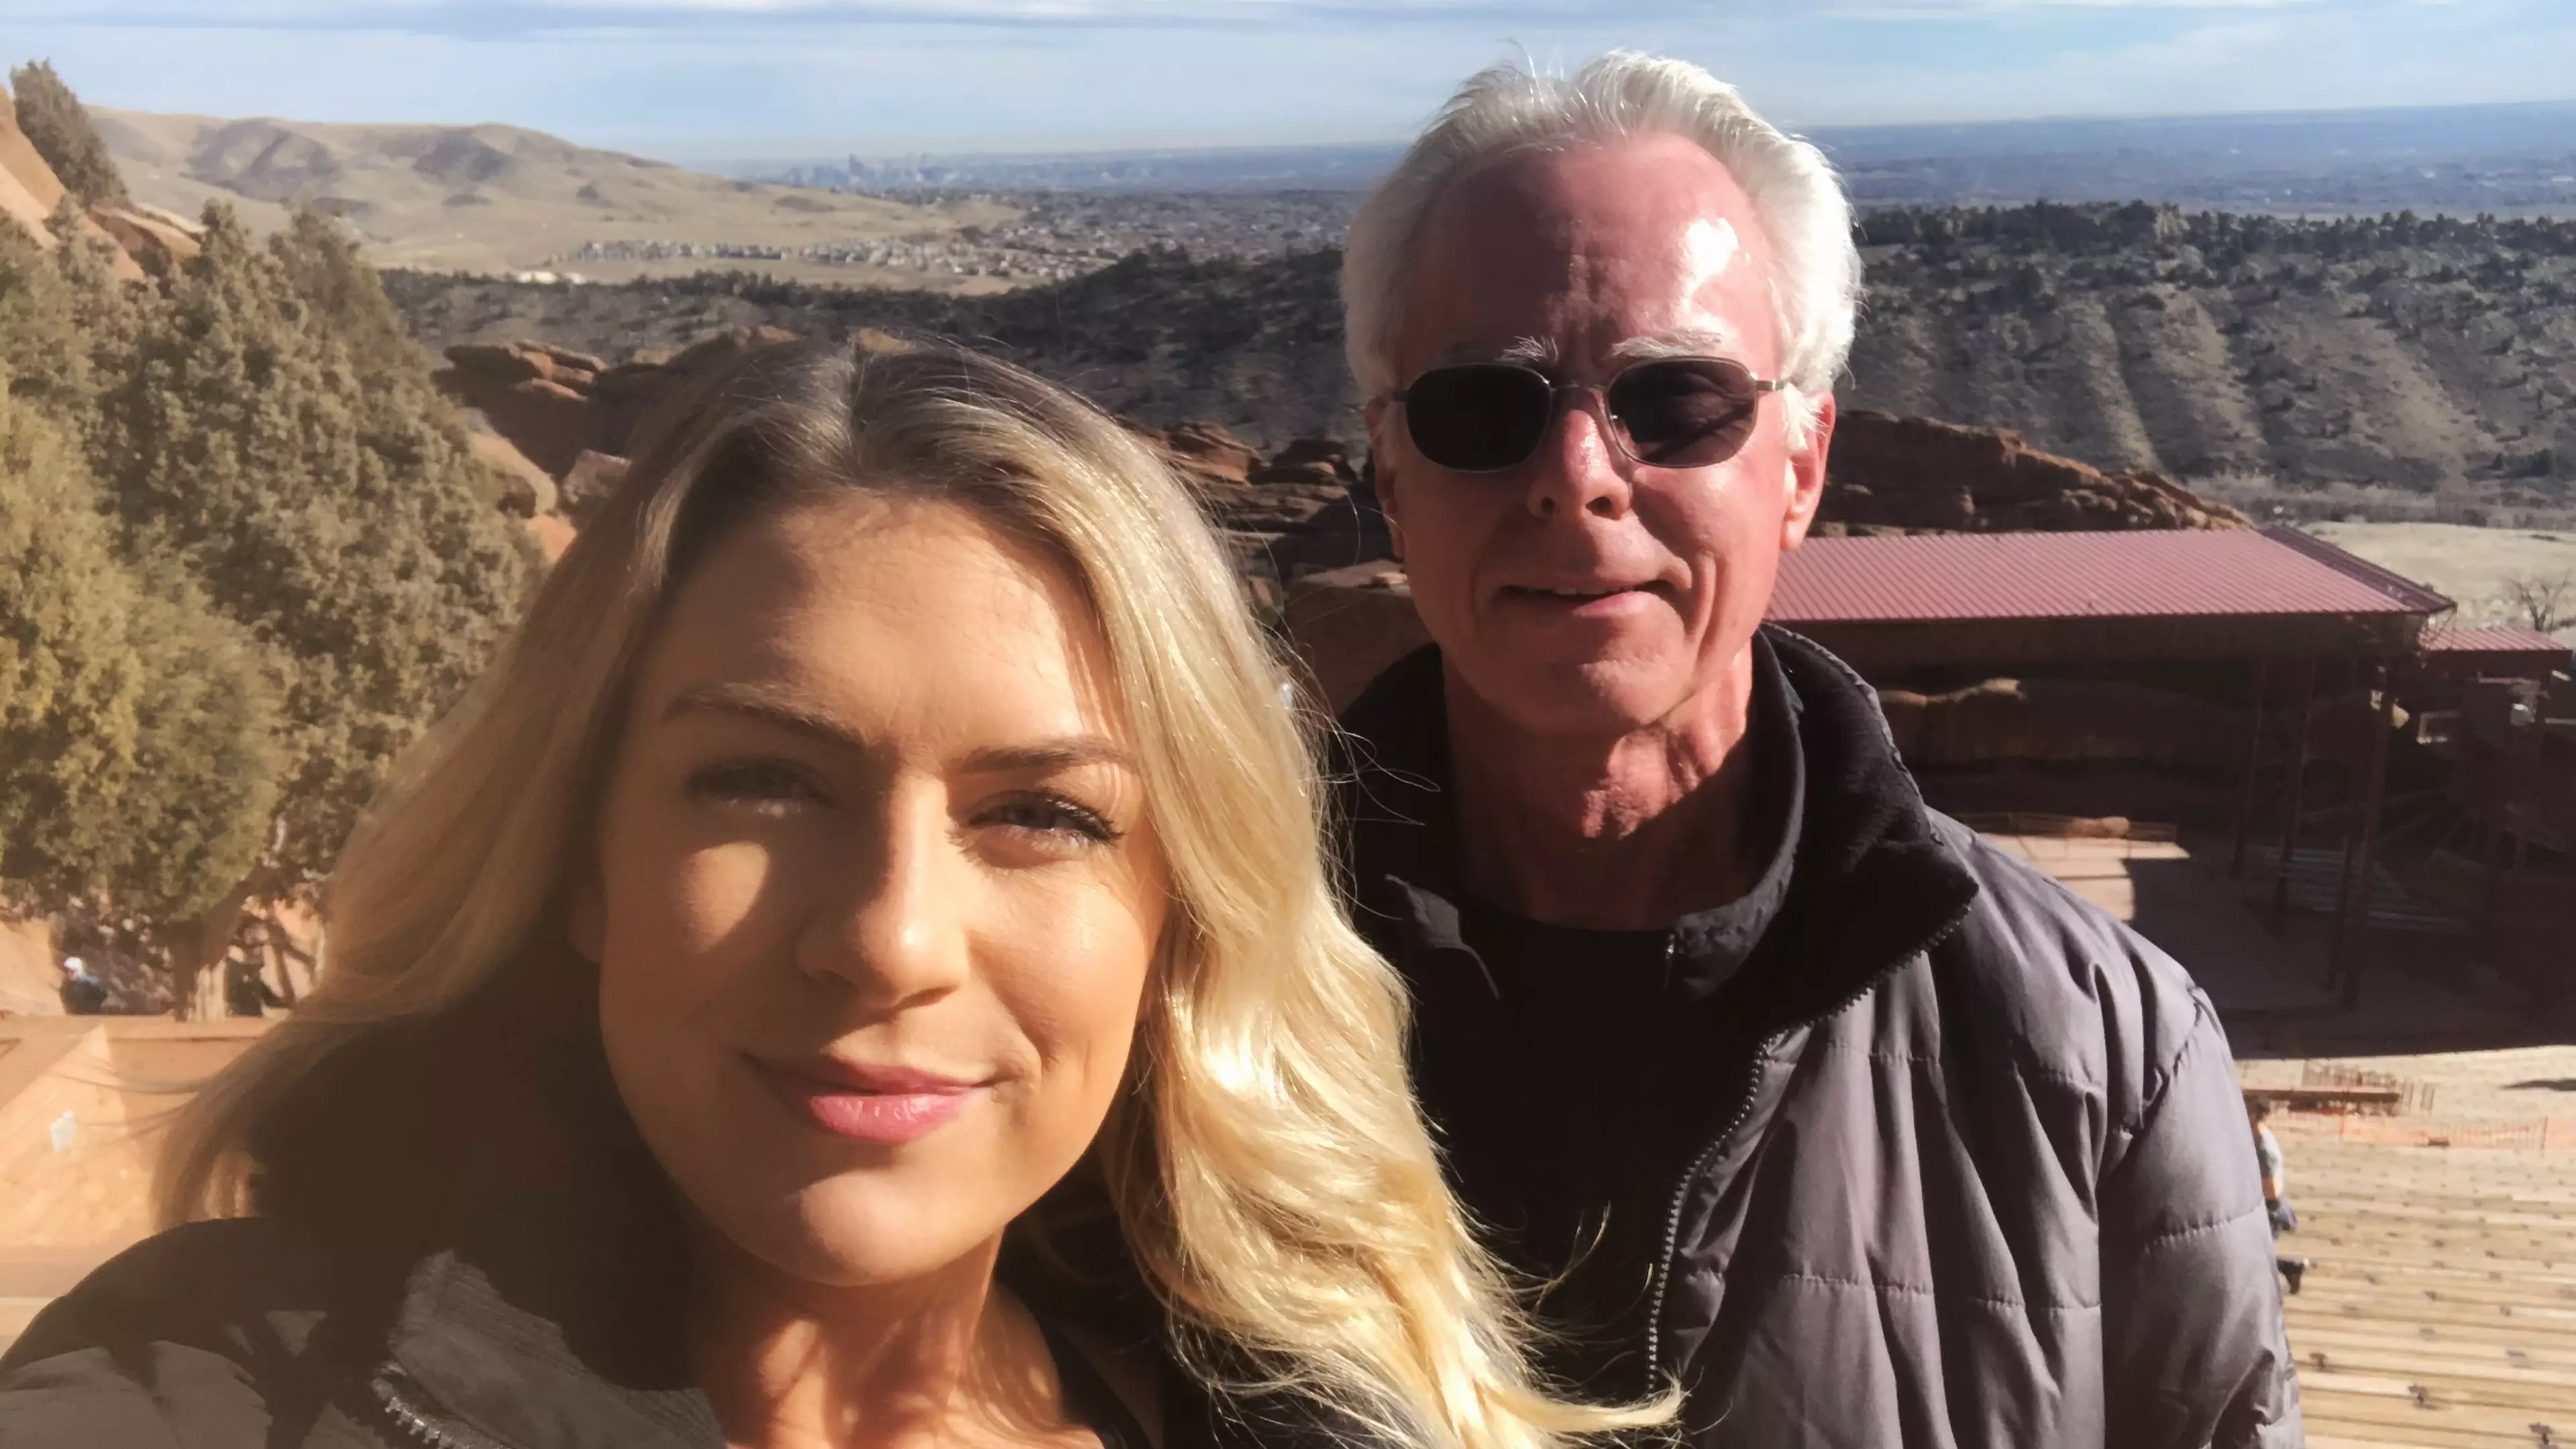 Woman Goes On Road Trip With Her Uber Driver After Her Plans Are Cancelled